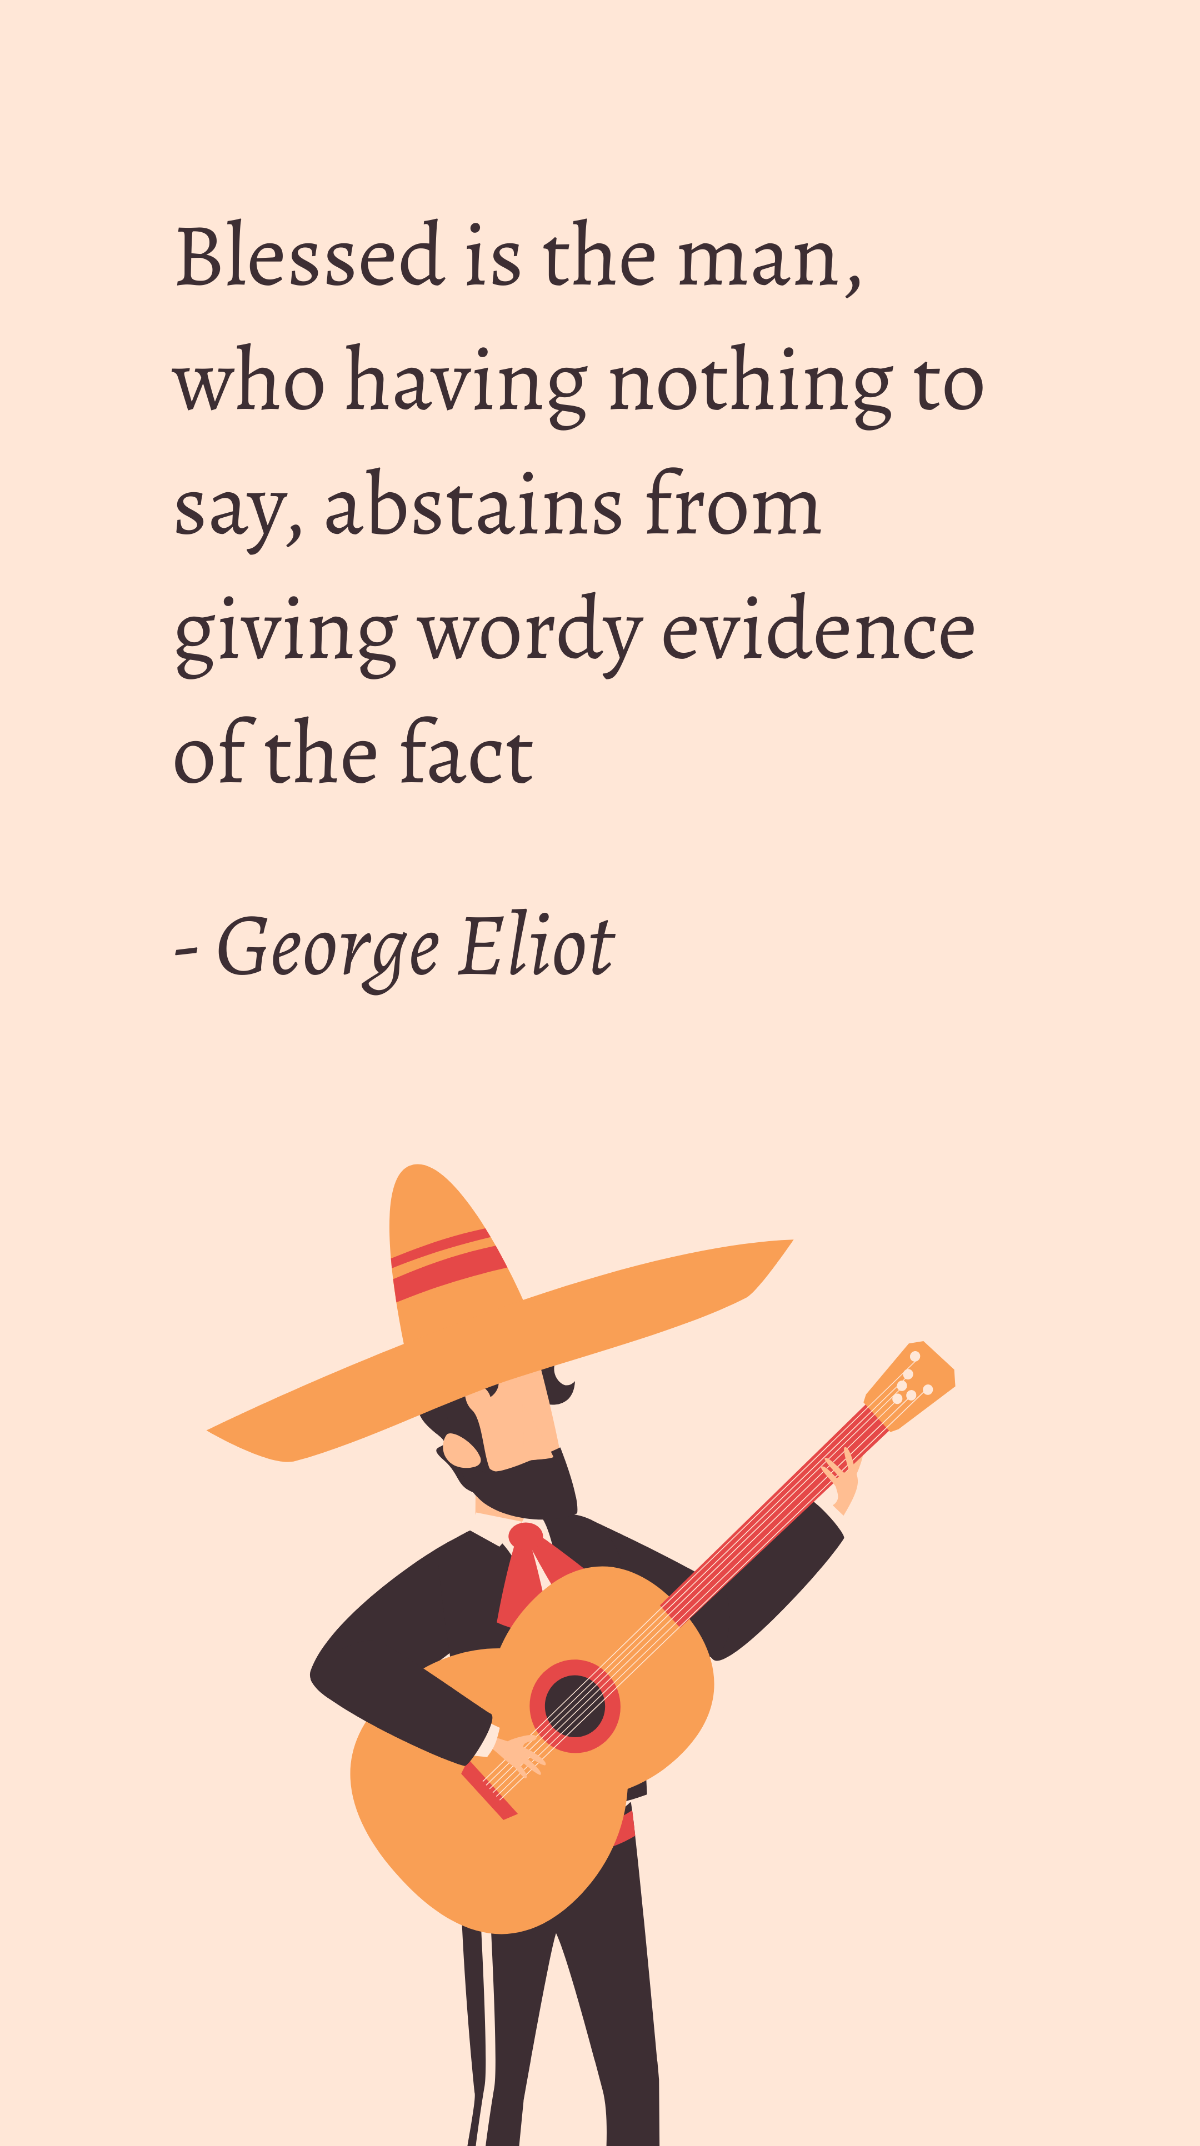 Free George Eliot - Blessed is the man, who having nothing to say, abstains from giving wordy evidence of the fact Template